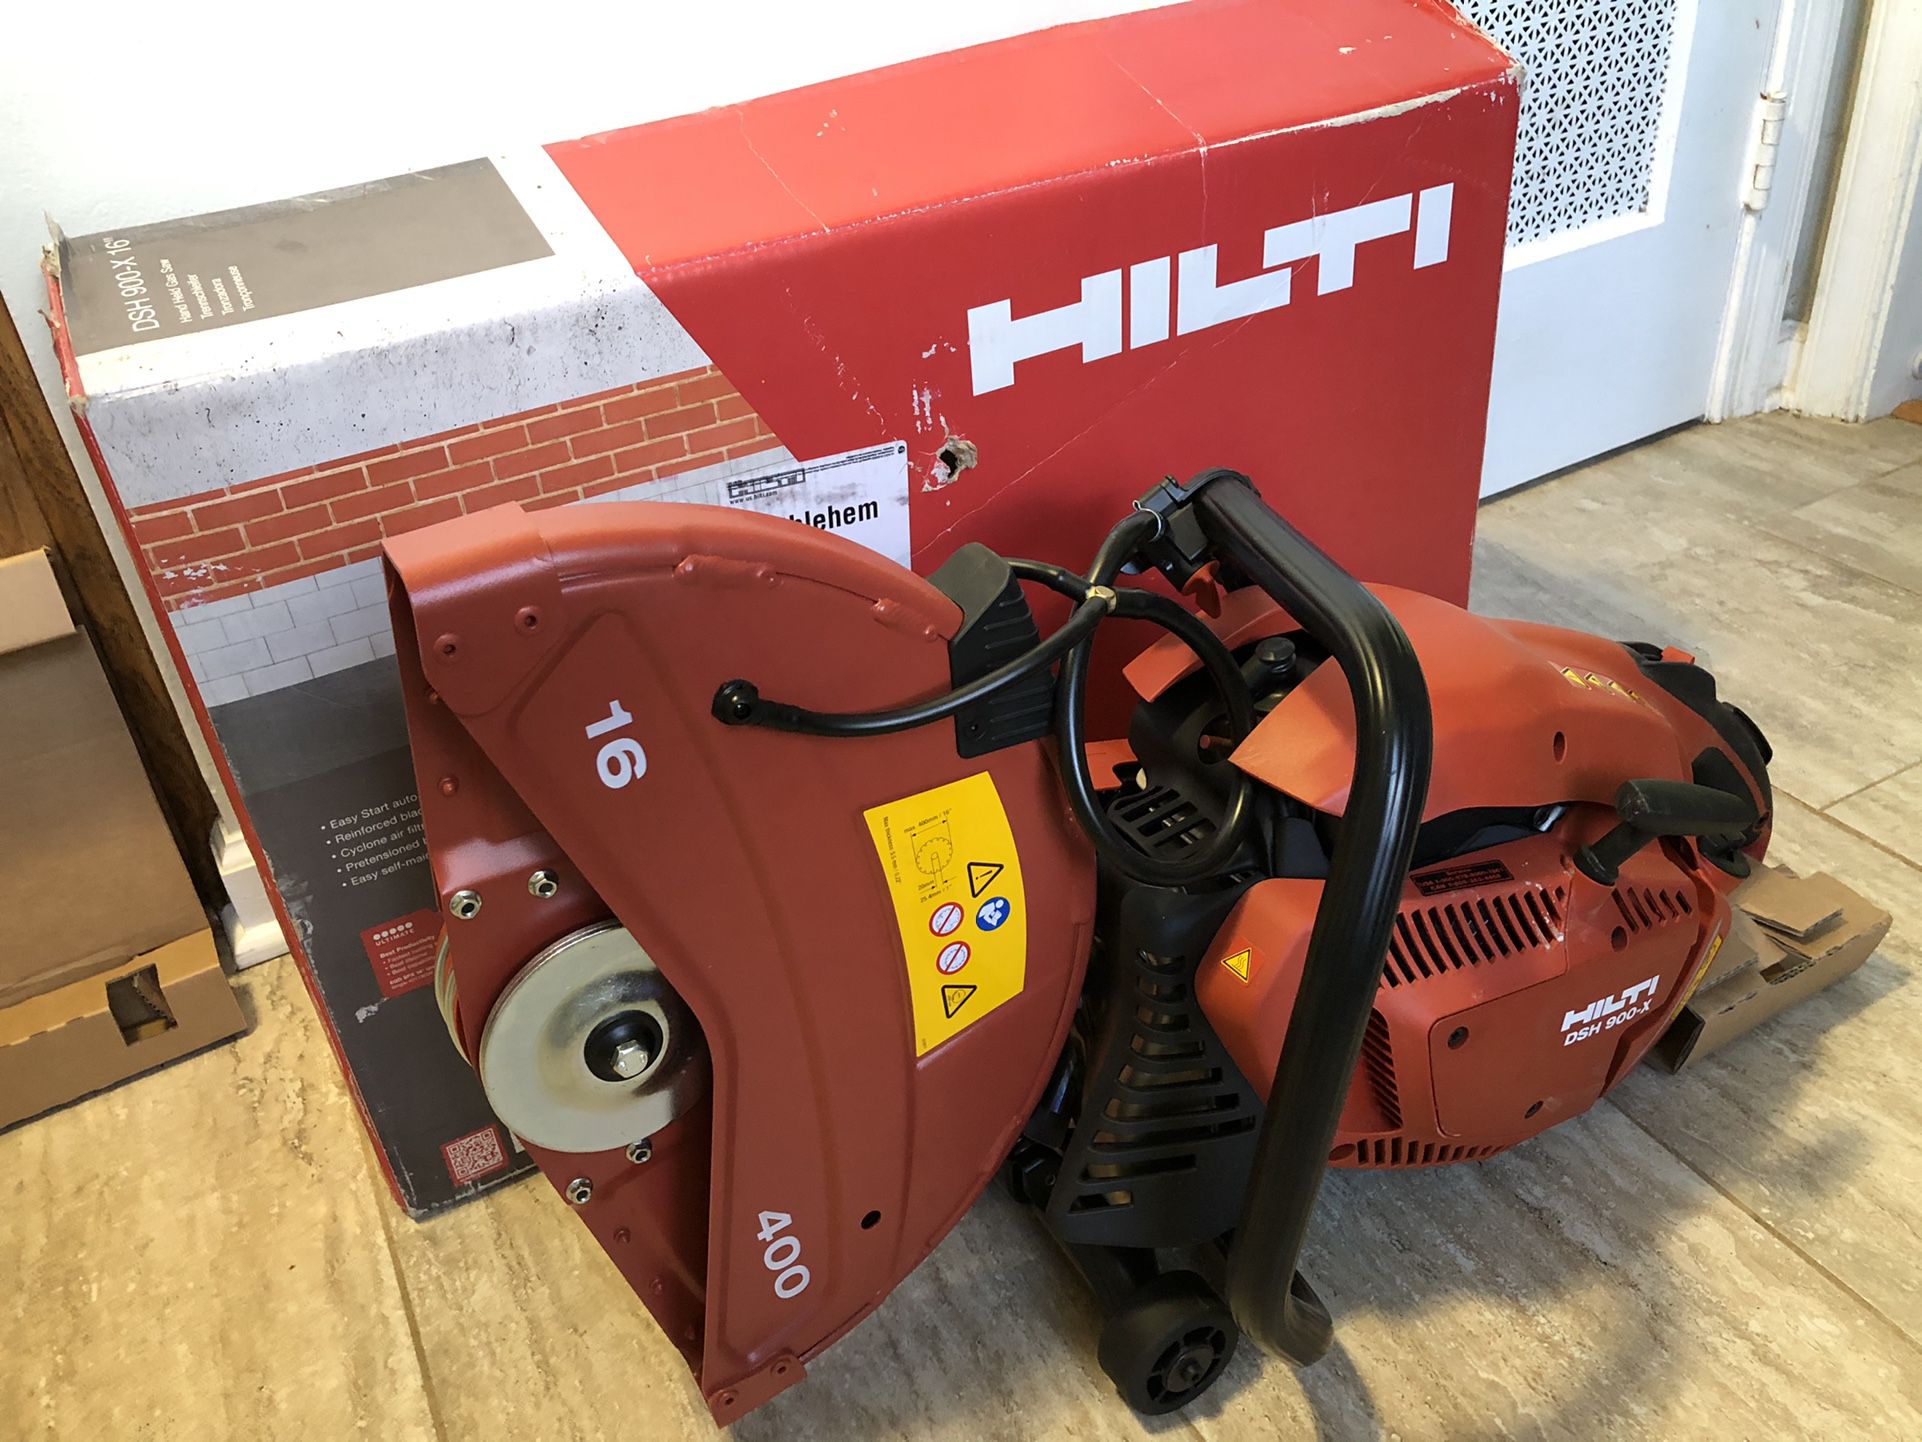 Hilti DSH 900-X 16”  Cut-Off (gas powered) brand new - Blade not included!